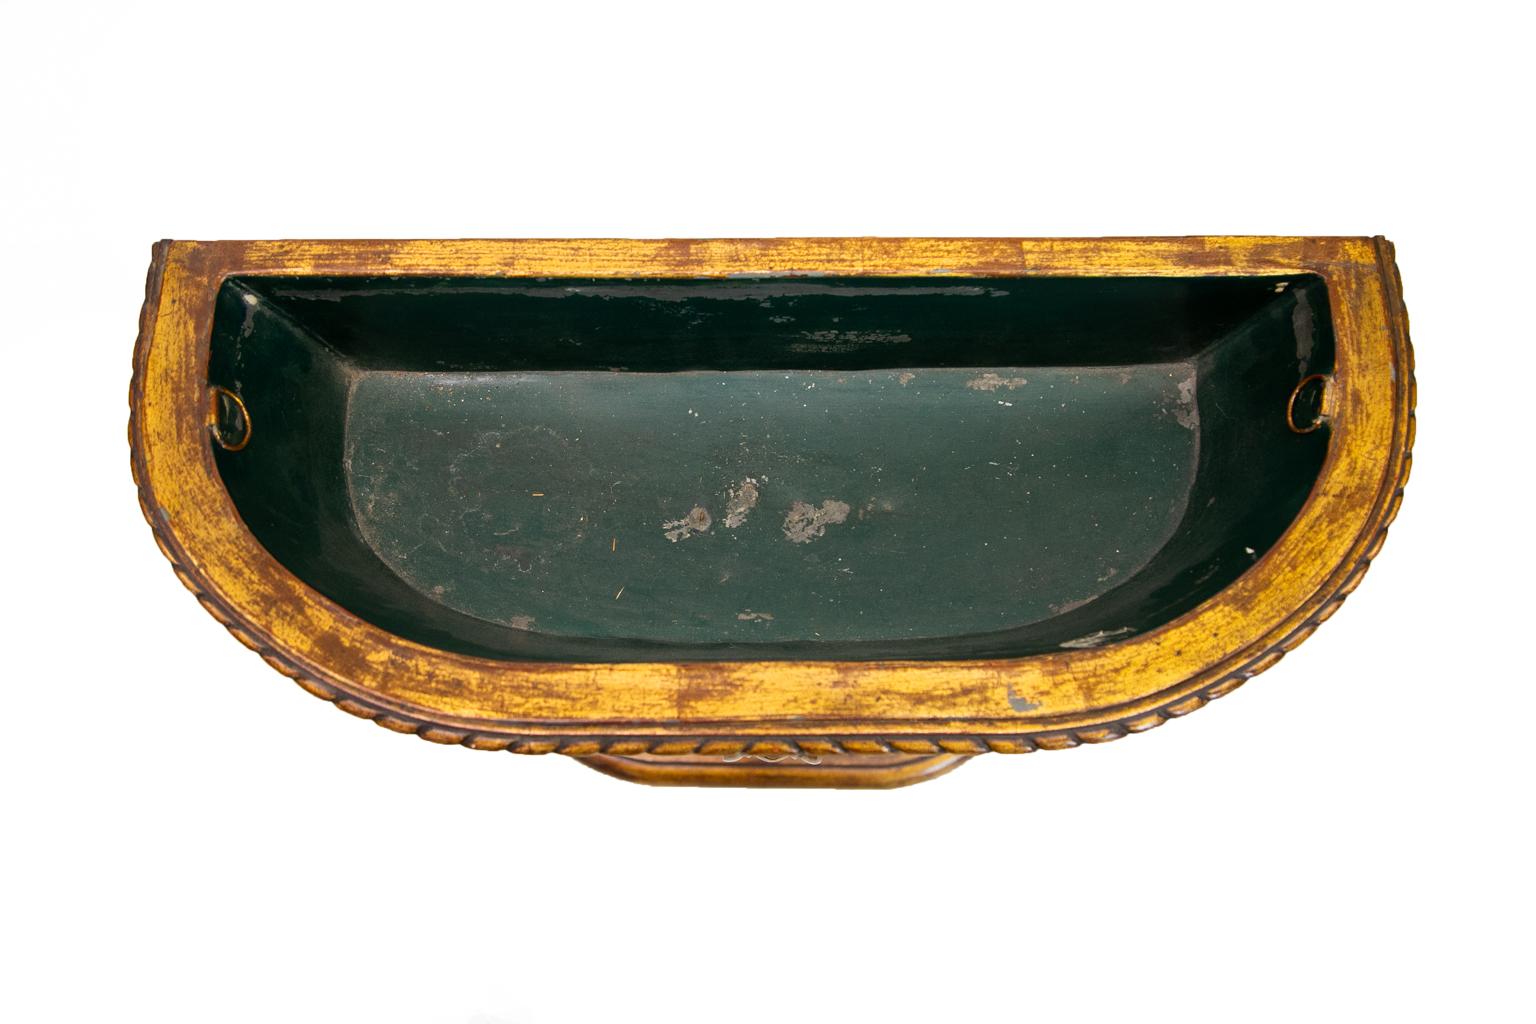 This carved French gold planter has a removable tin liner. The top edge has carved gadrooned edging on the top and a beaded molding on the bottom. The center of the container portion has a carved quilted pattern. The three legs have scroll shapes